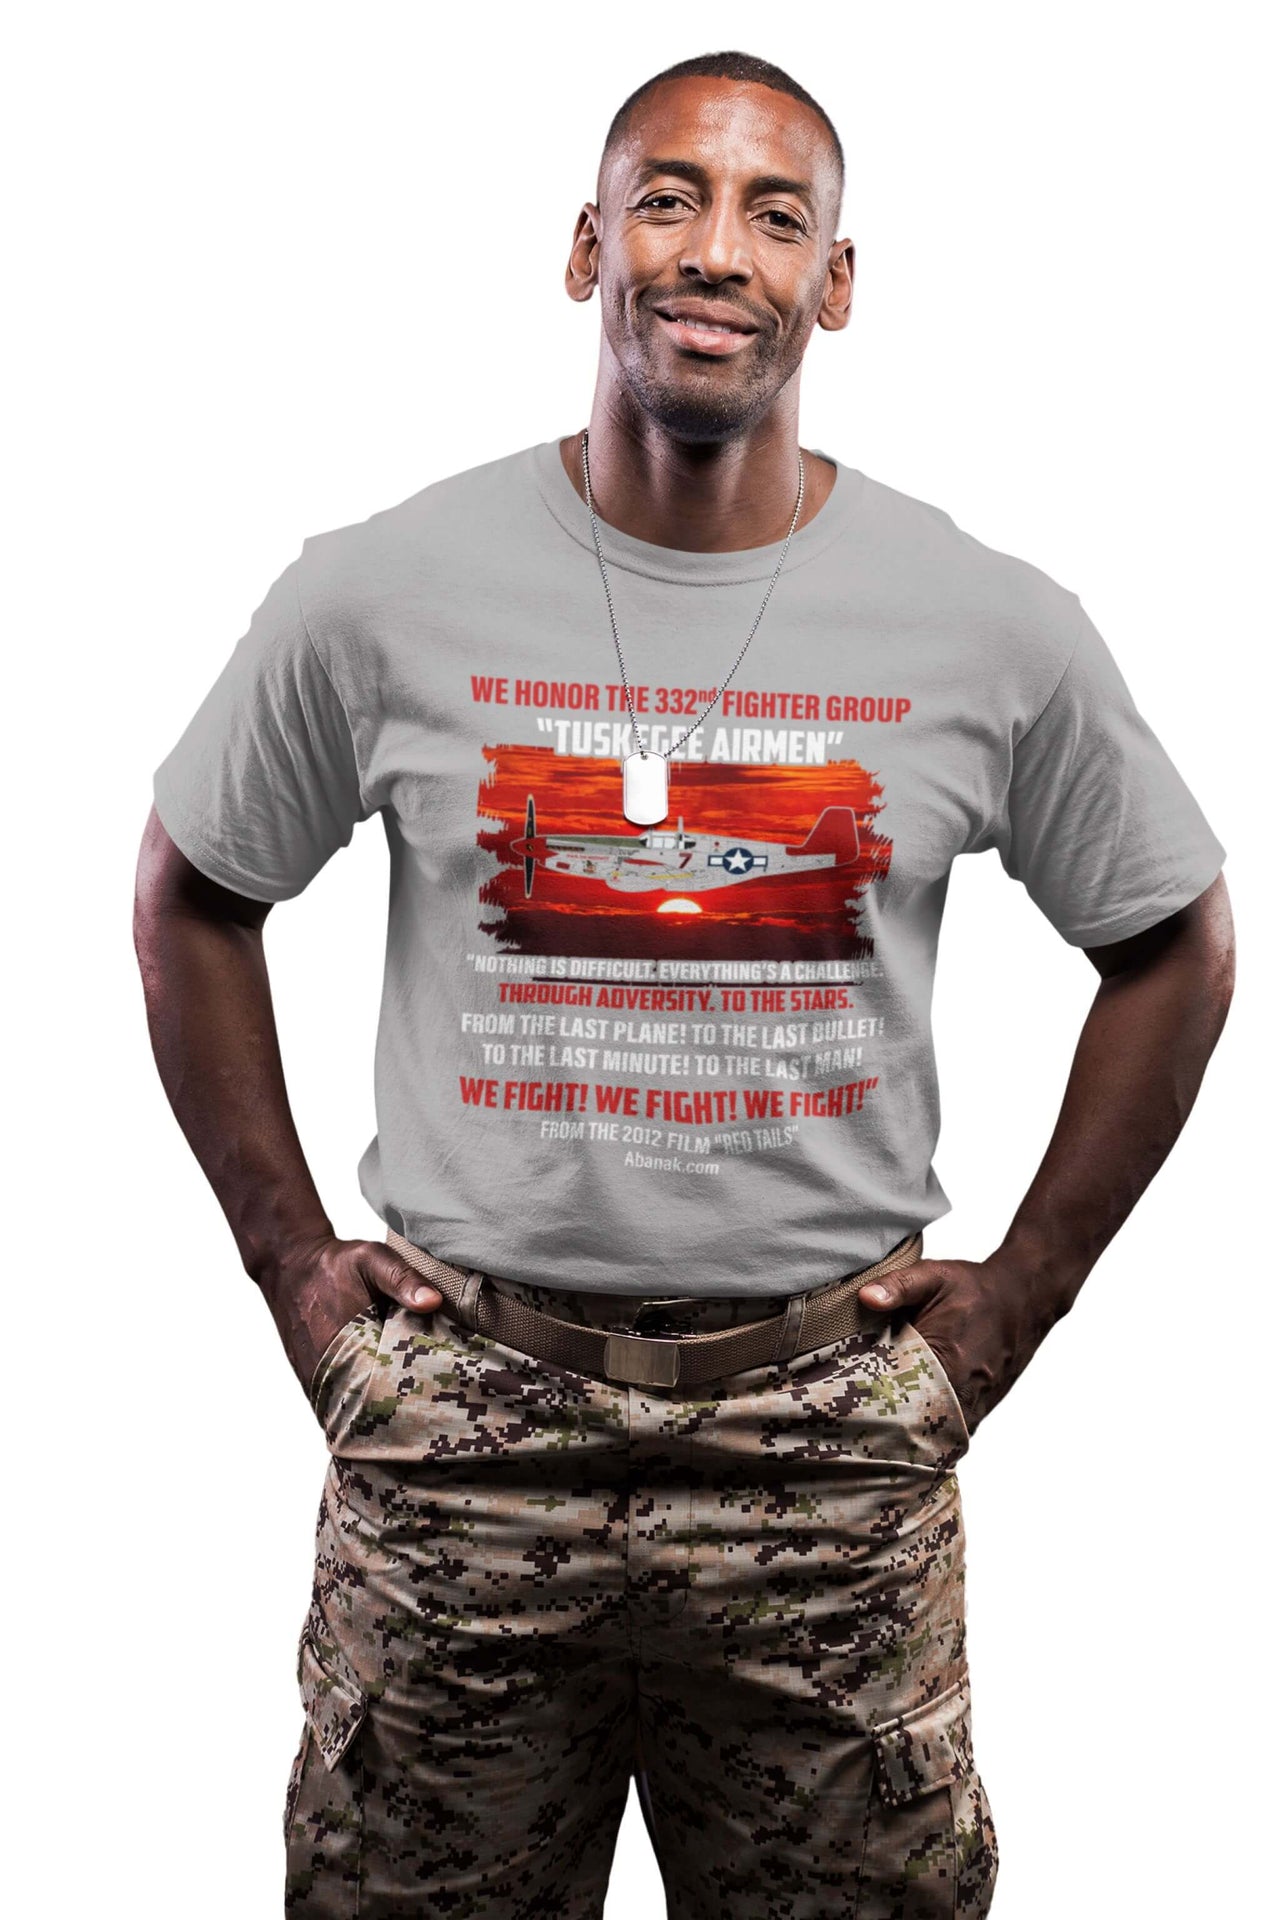 We Fight, We Fight, We Fight - Red Tails Inspirational Quote - Men's Vintage Tee